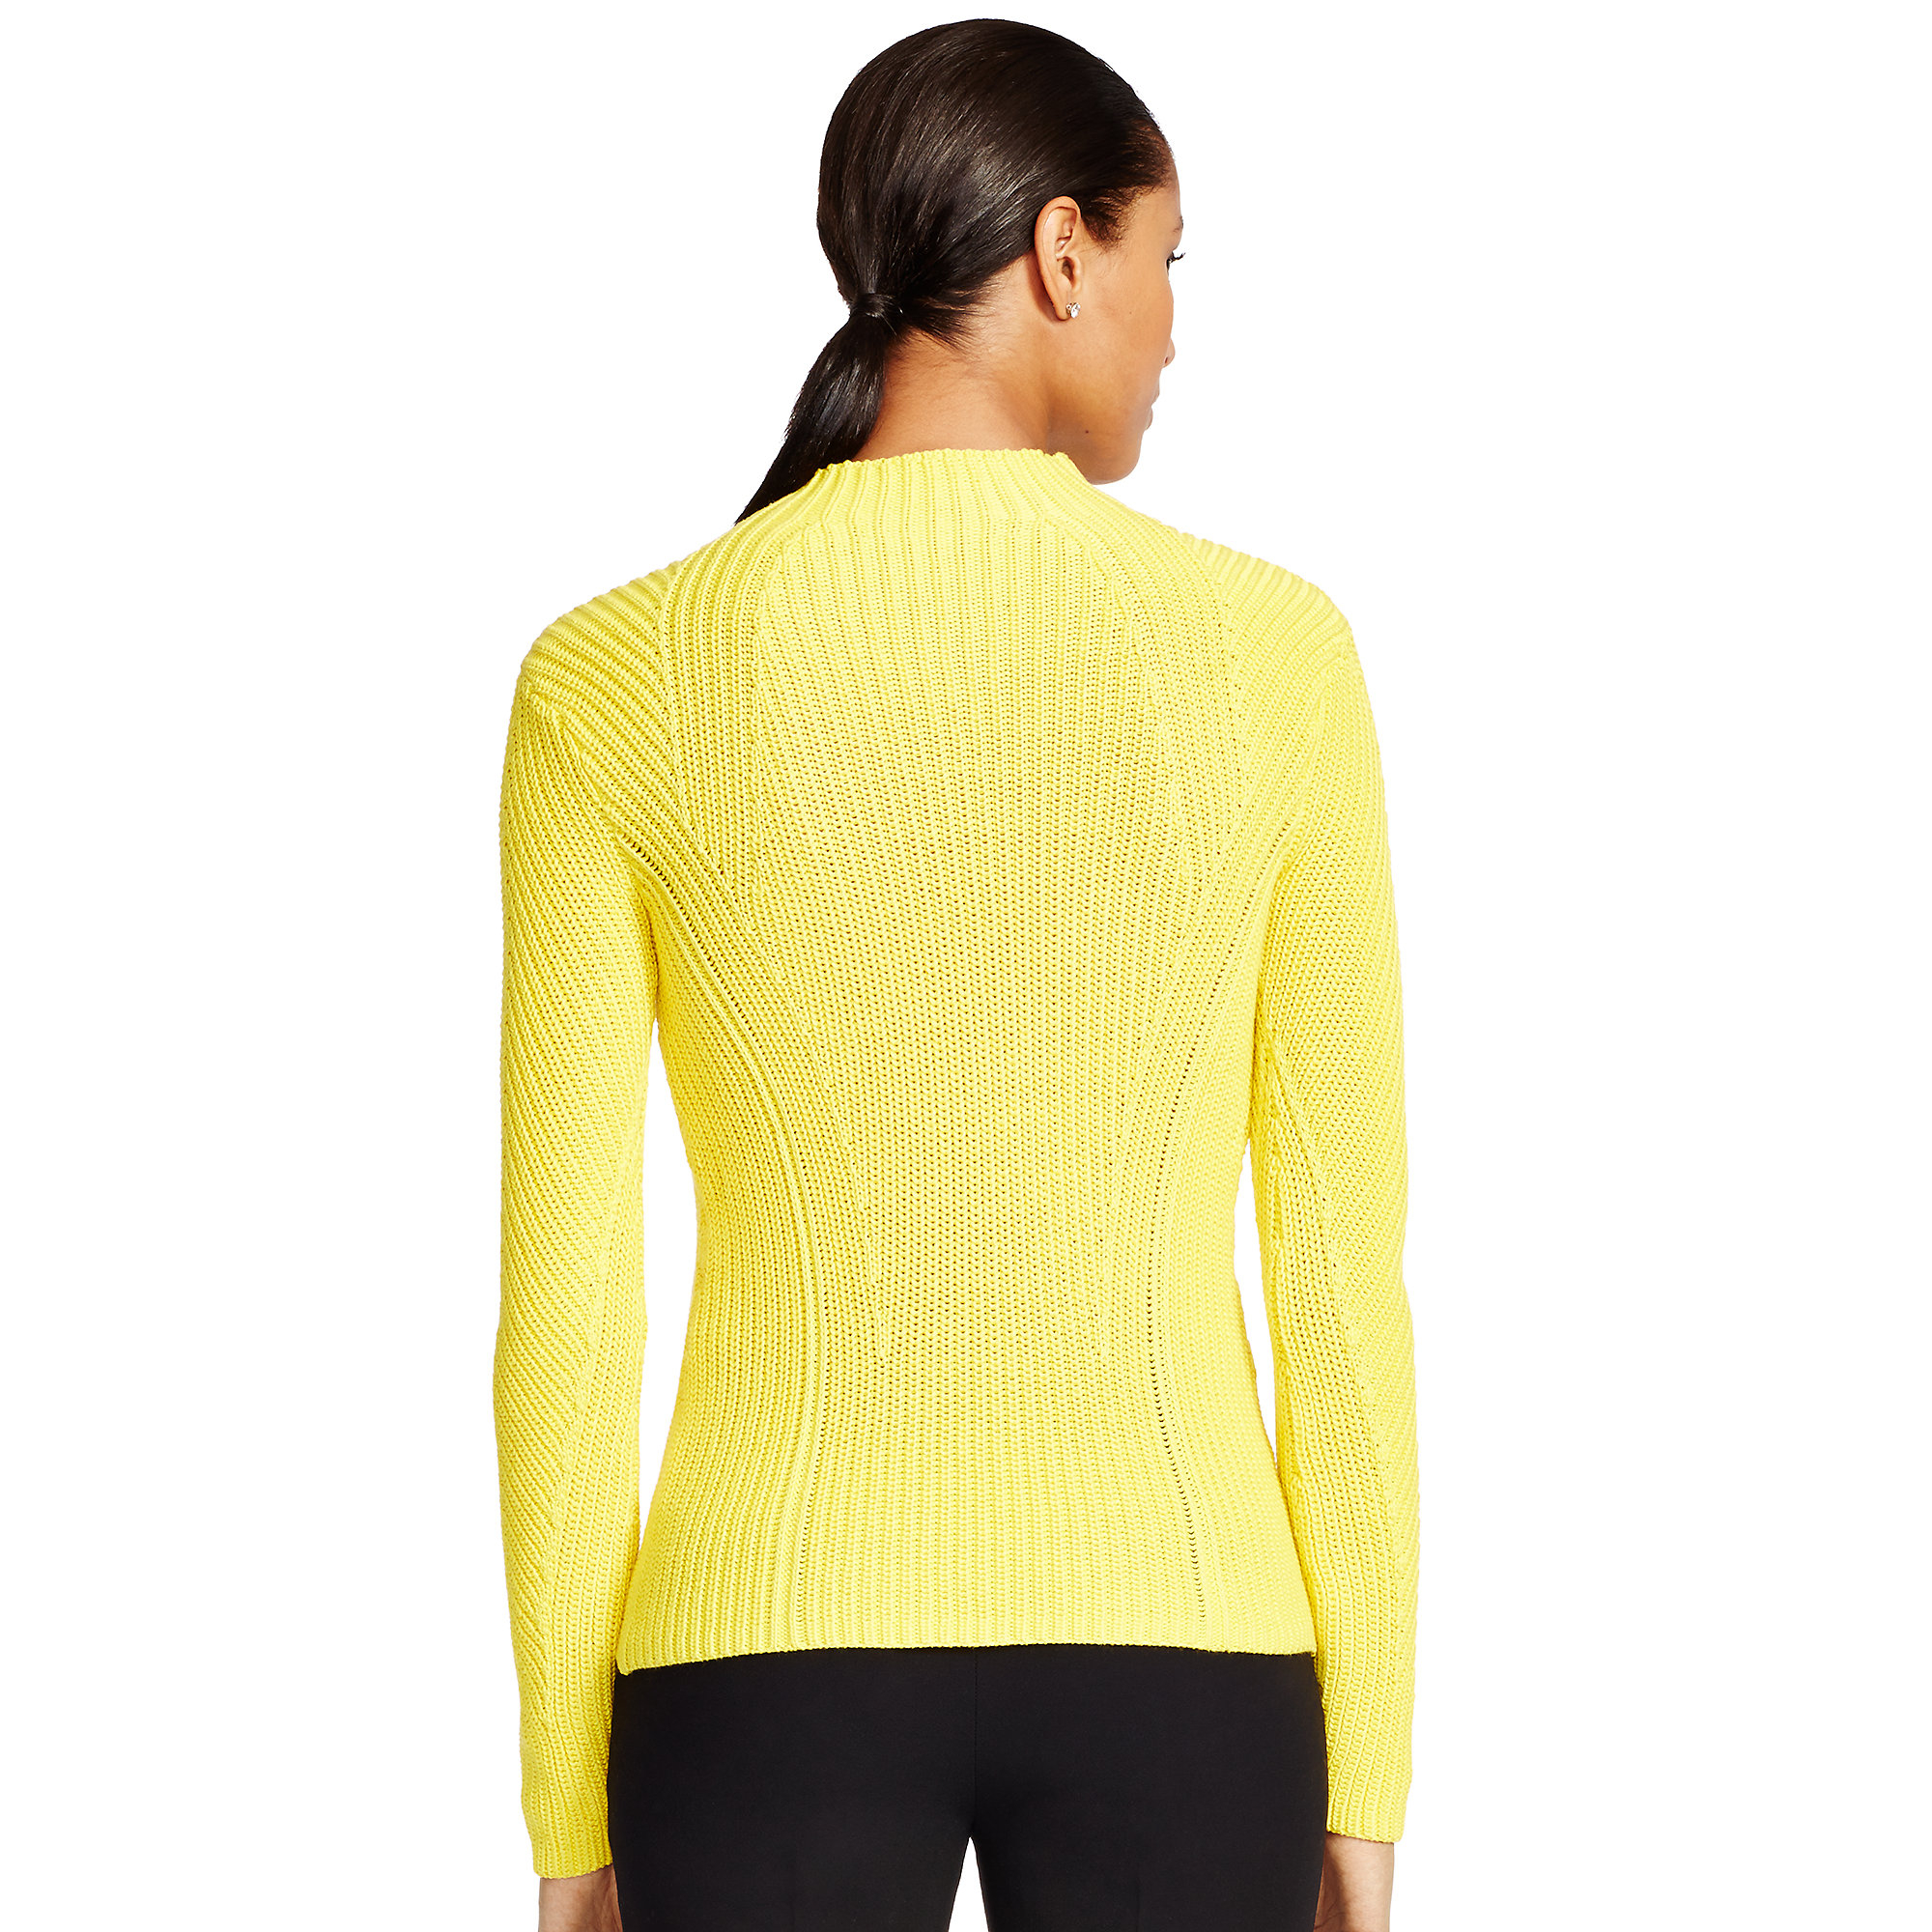 yellow and black cardigan sweater for women black